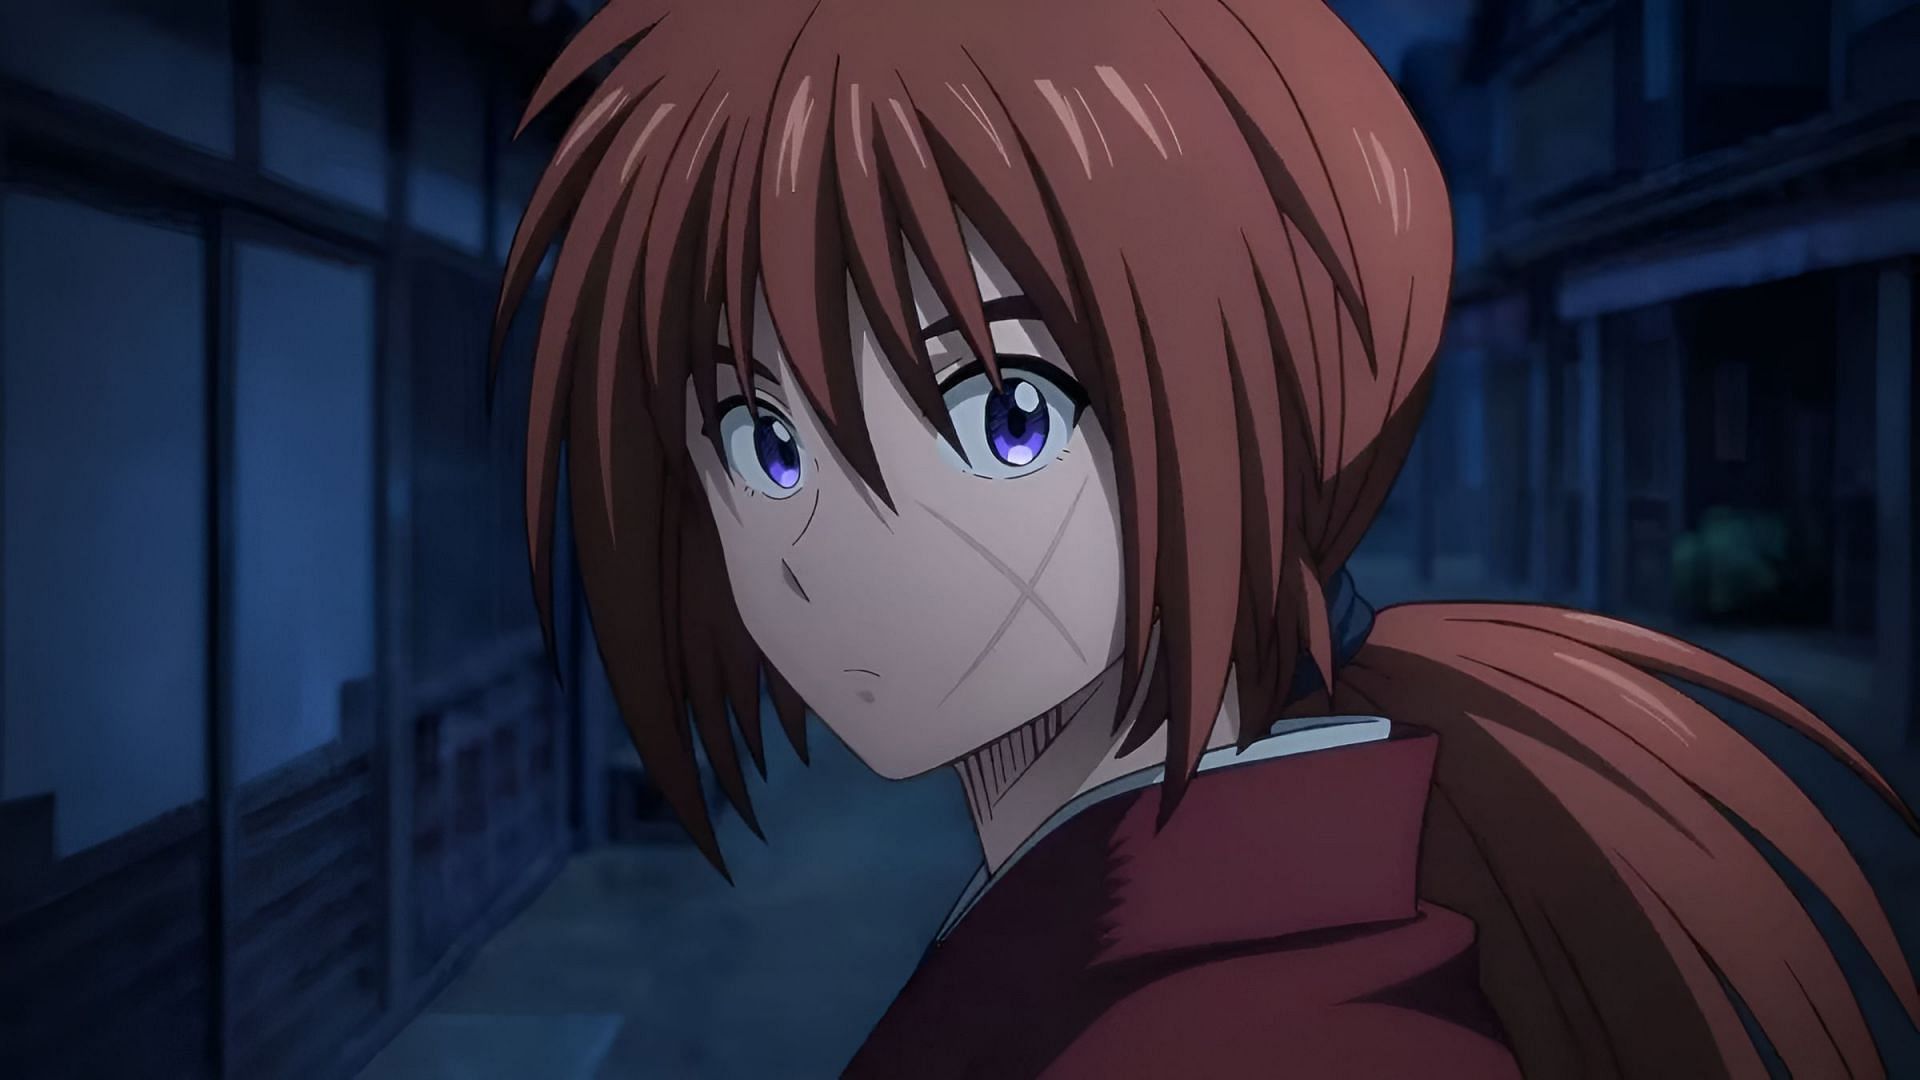 Kenshin as seen in the anime (Image via Lidenfilms)